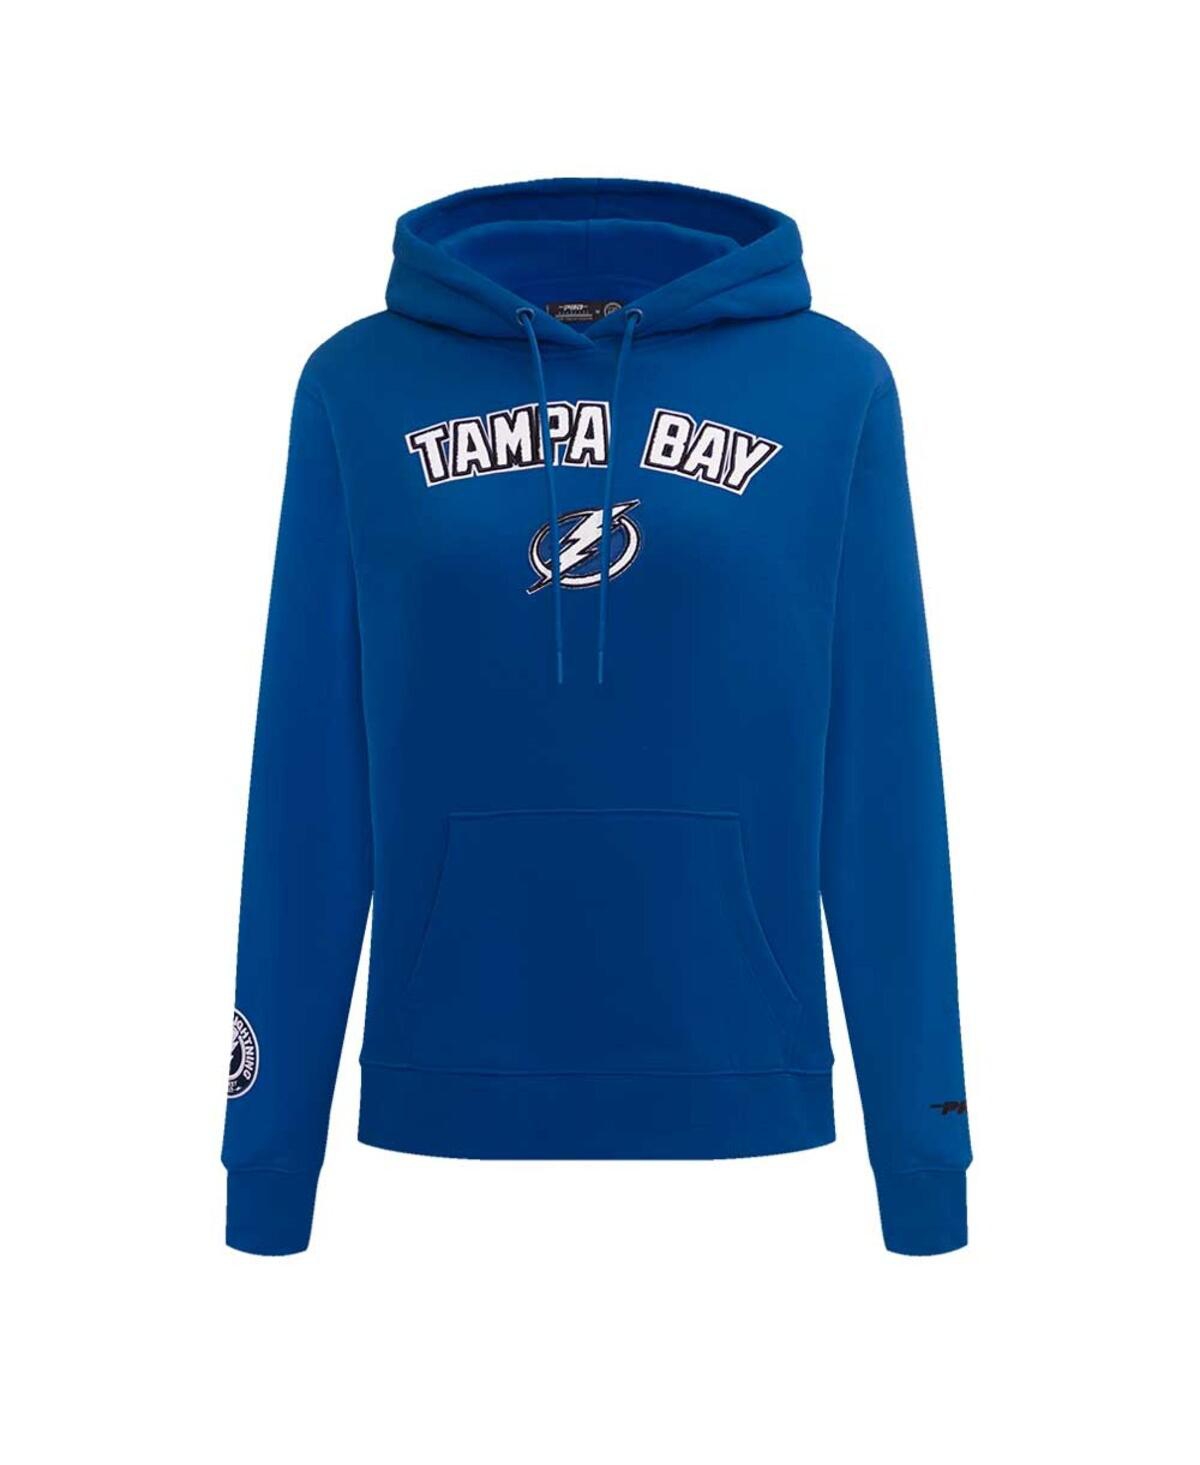 Shop Pro Standard Women's  Blue Tampa Bay Lightning Classic Chenille Pullover Hoodie